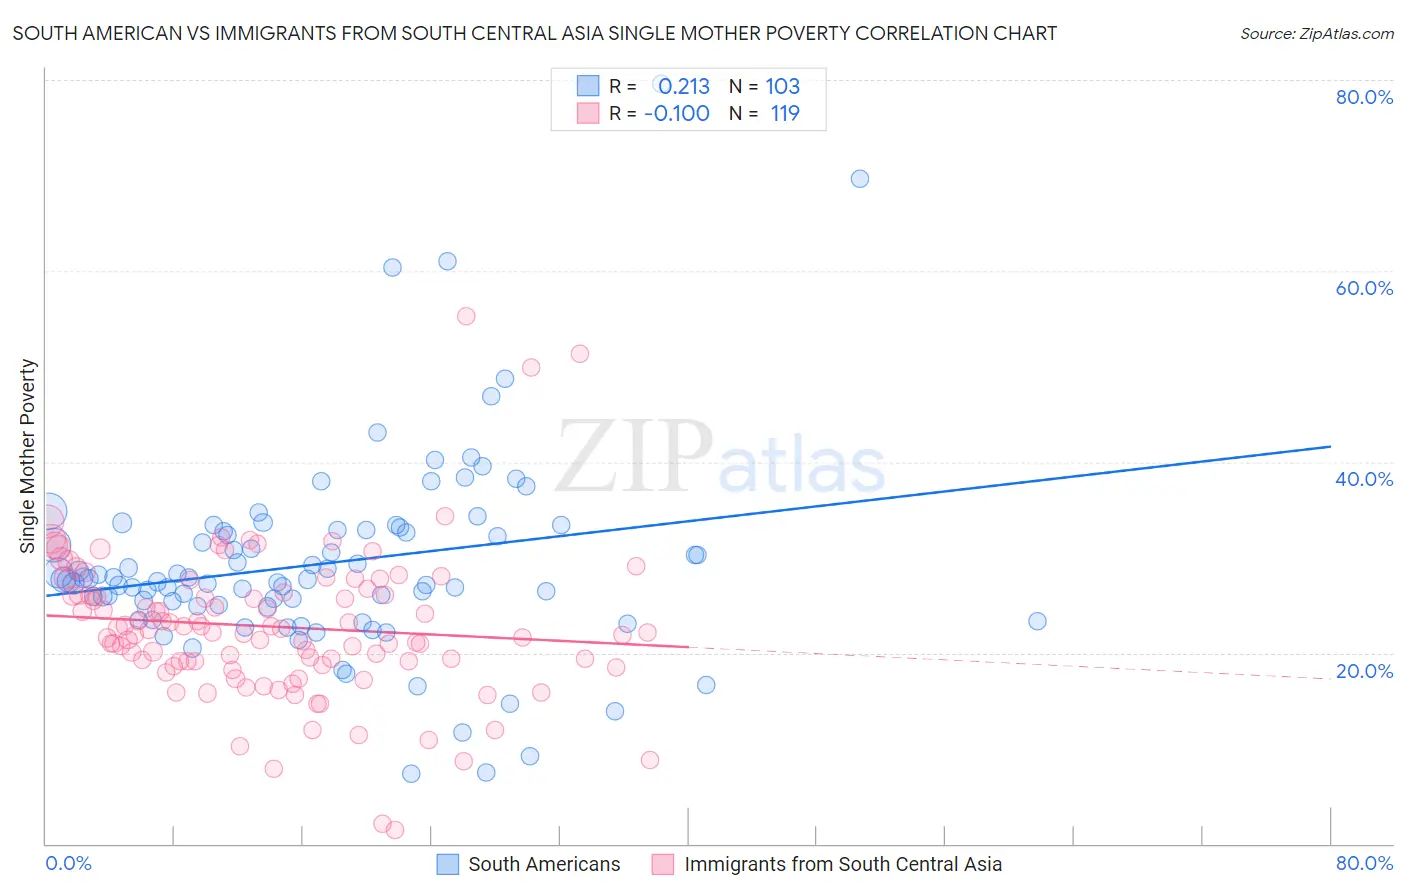 South American vs Immigrants from South Central Asia Single Mother Poverty